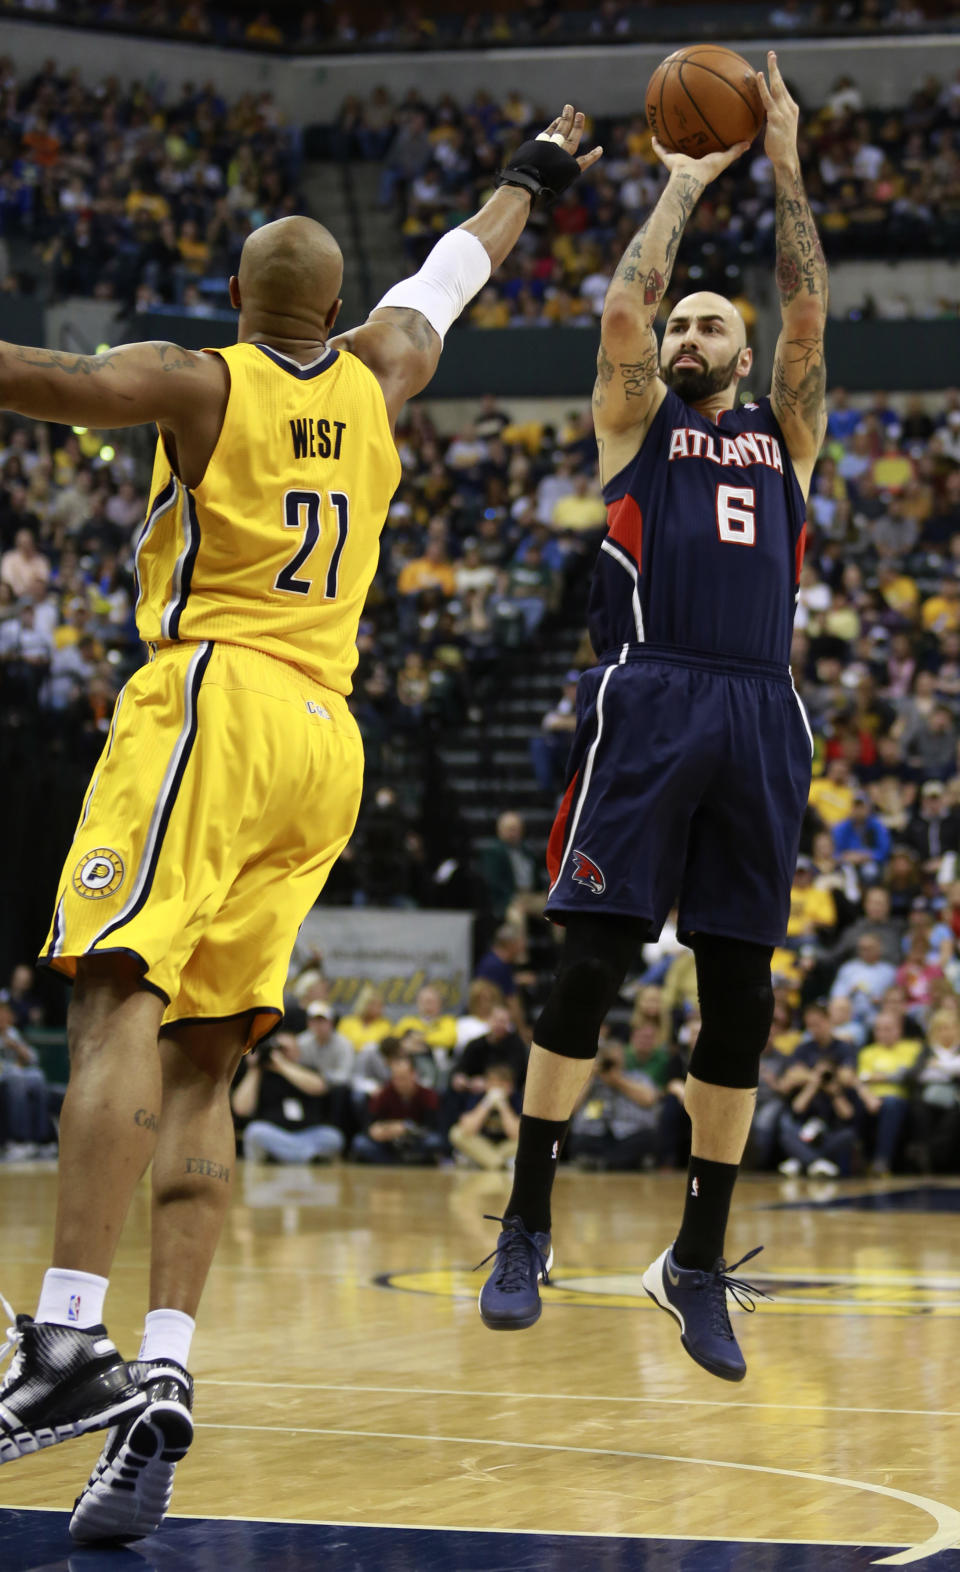 Atlanta Hawks center Pero Antic (6) shoots the basketball defended by Indiana Pacers forward David West in the first half of an NBA basketball game in Indianapolis, Sunday, April 6, 2014. (AP Photo/R Brent Smith)